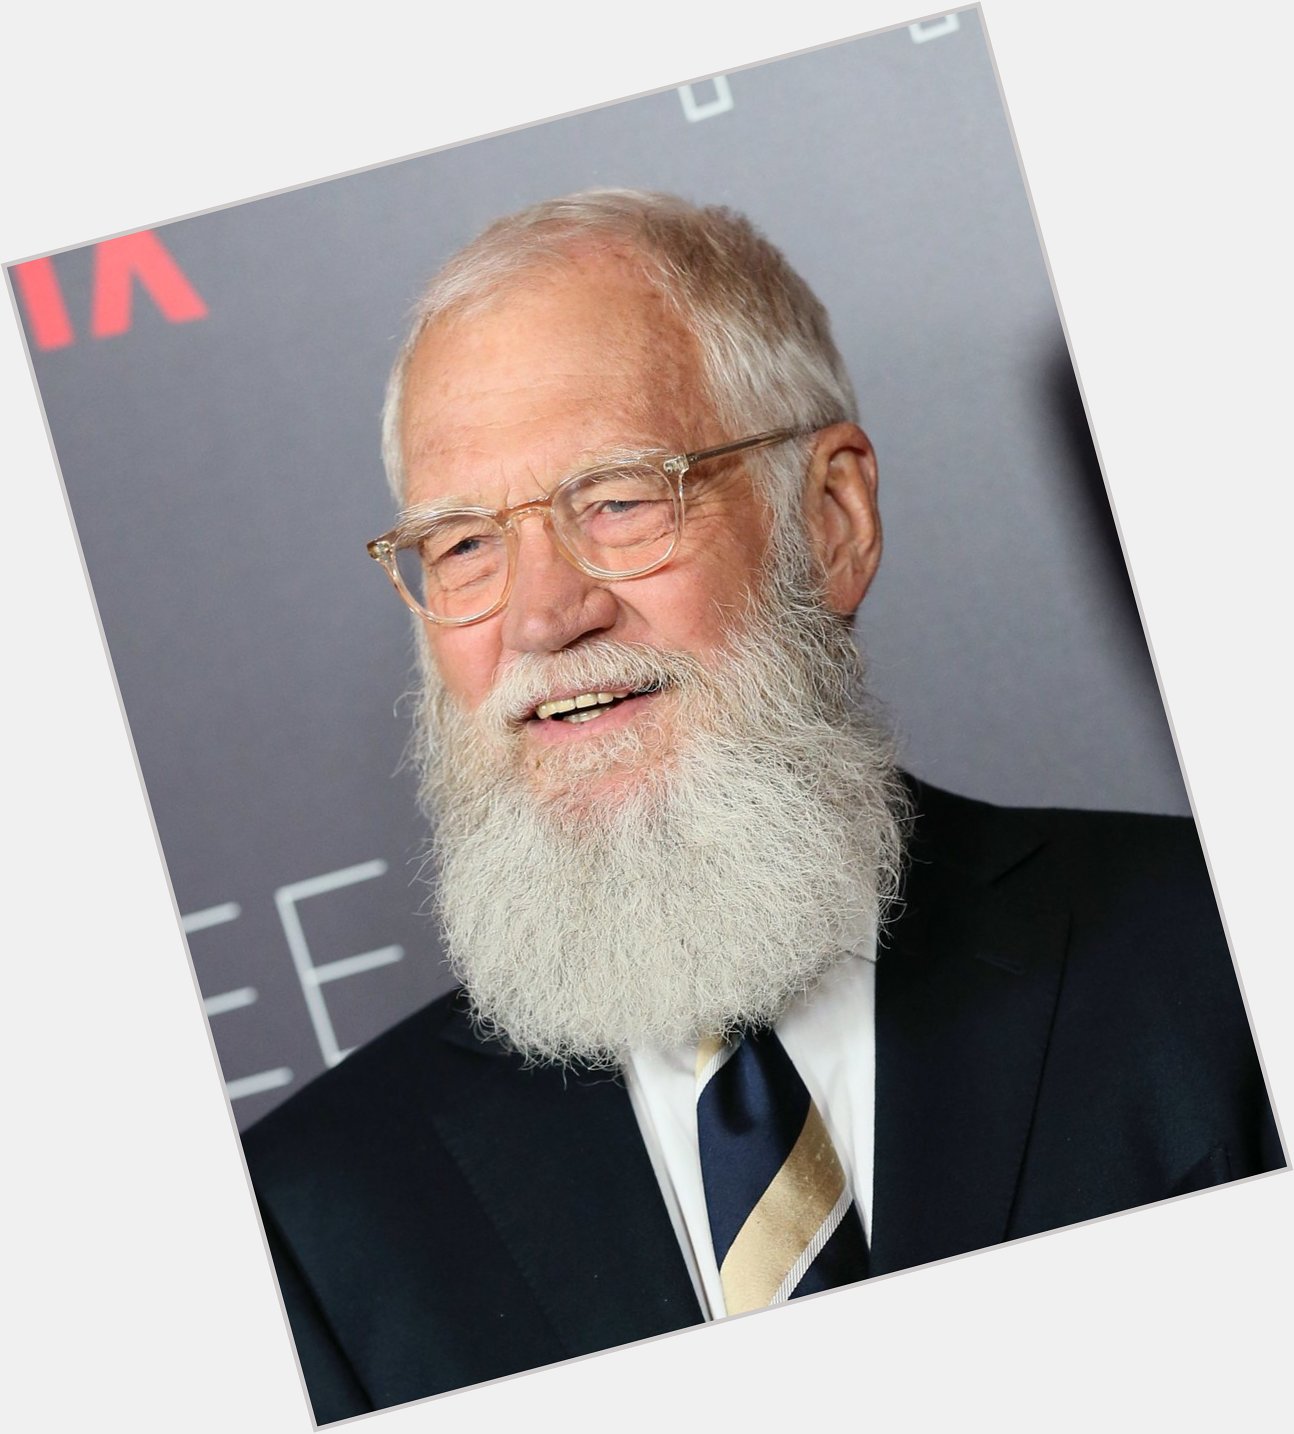 Happy Birthday to David Letterman, who turns 75 today!!! 